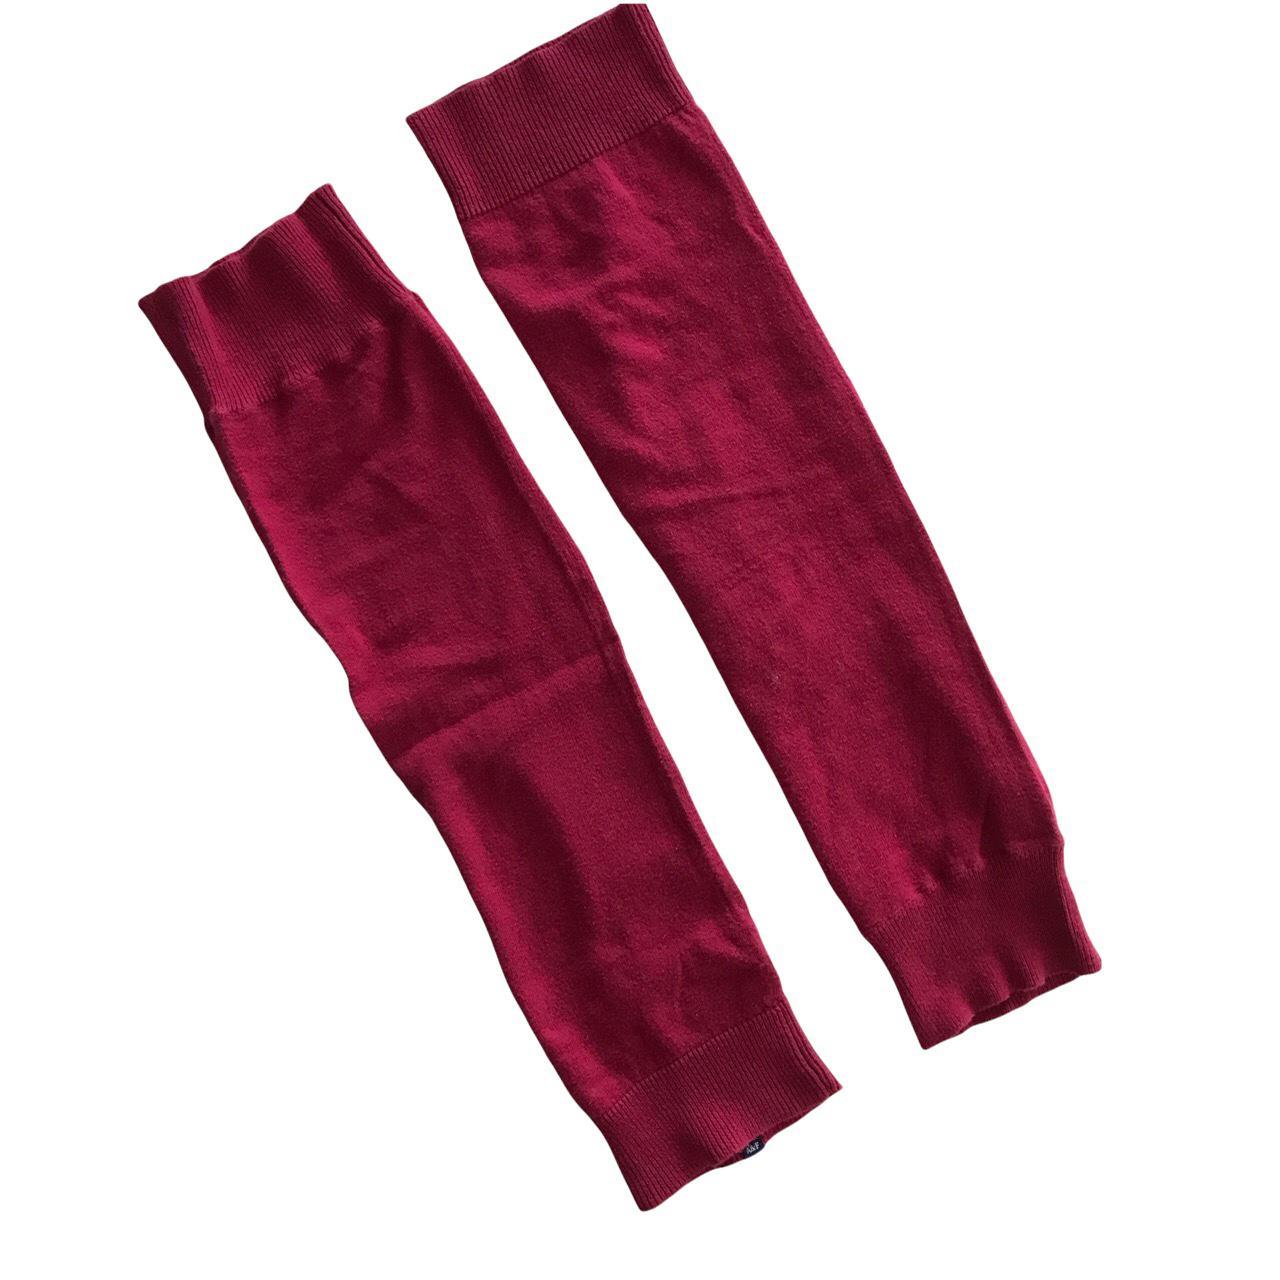 Product Image 4 - Abercrombie and Fitch leg warmers
Dark